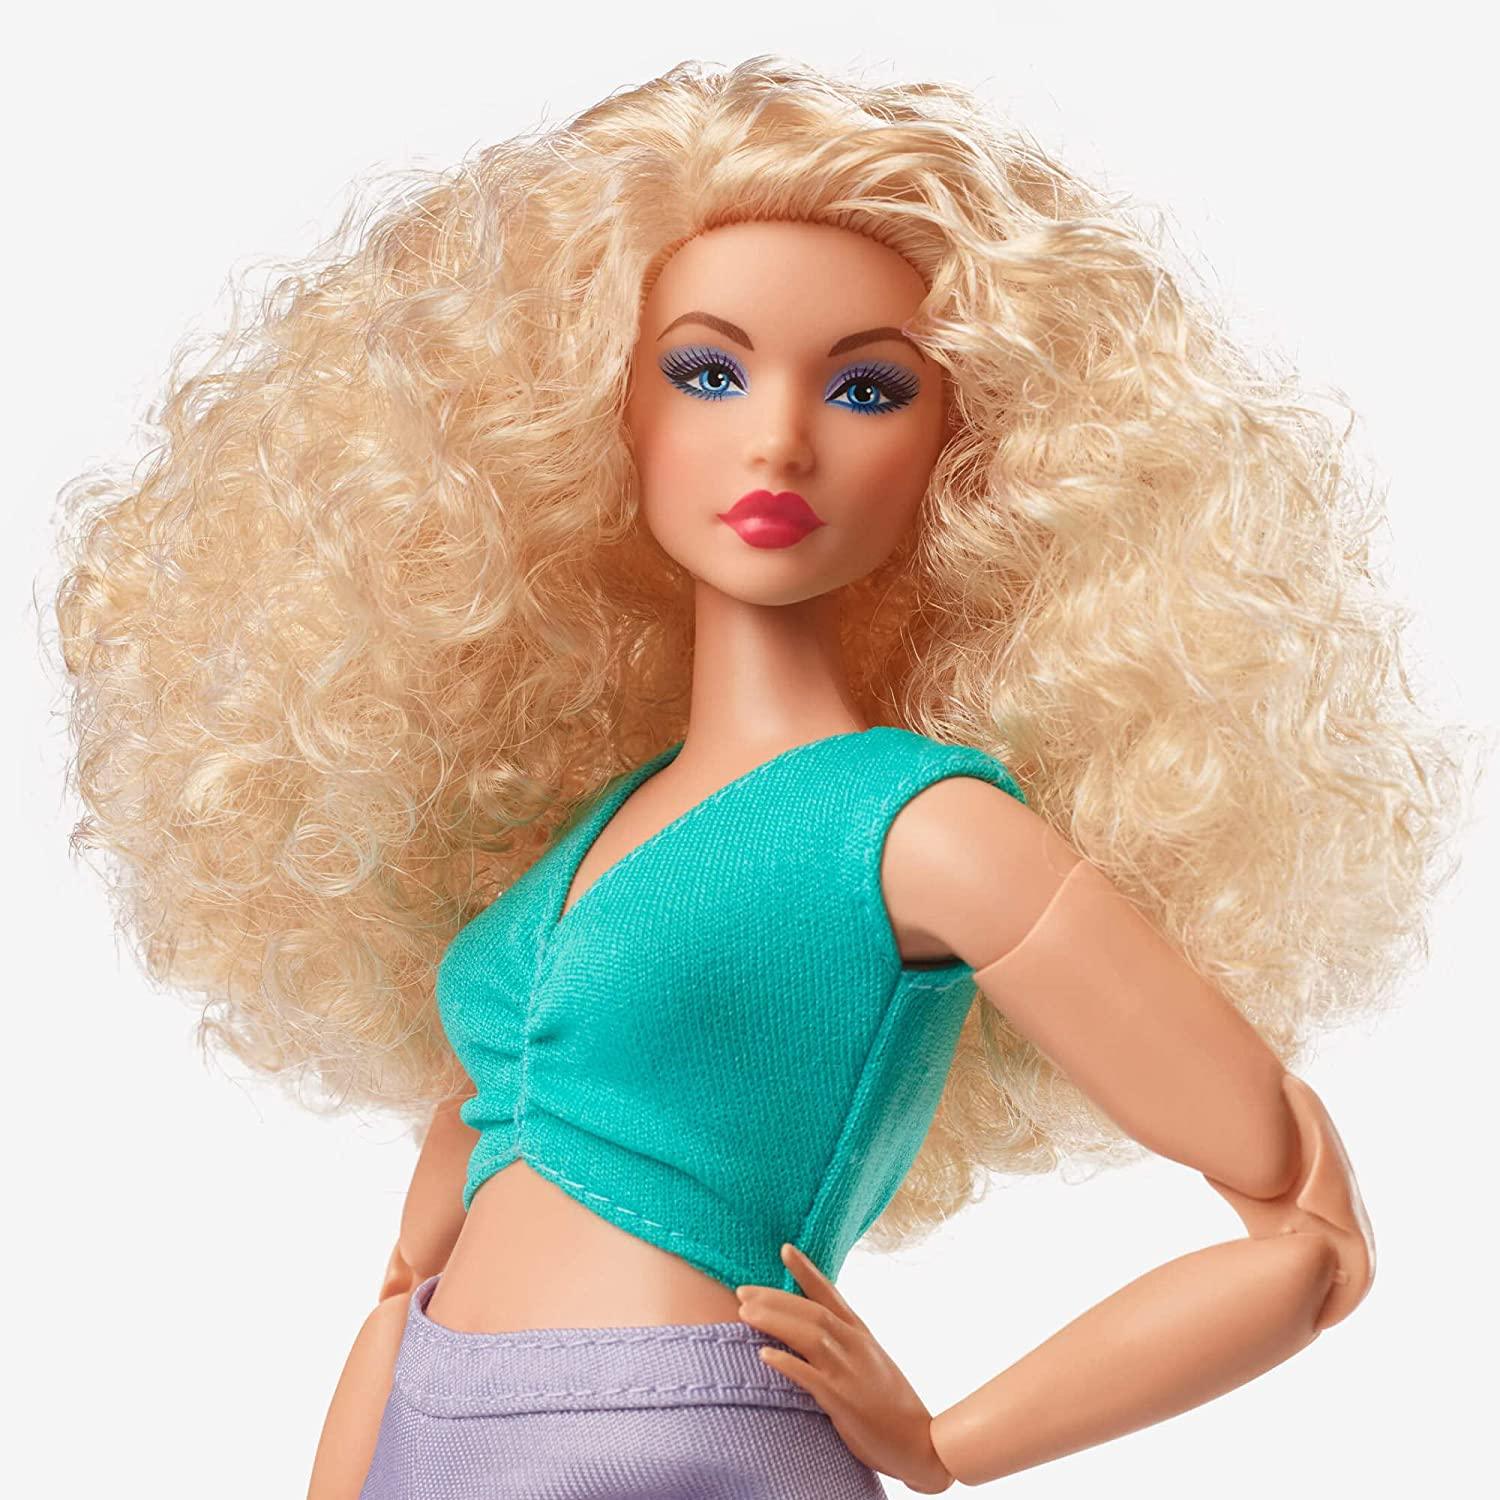 Barbie Looks Doll, Blonde Curly Hair, Color Block Outfit with Waist Cut-Out, Curvy Body Type, Style and Pose, Fashion Collectibles - BumbleToys - 5-7 Years, Barbie, Fashion Dolls & Accessories, Girls, Pre-Order